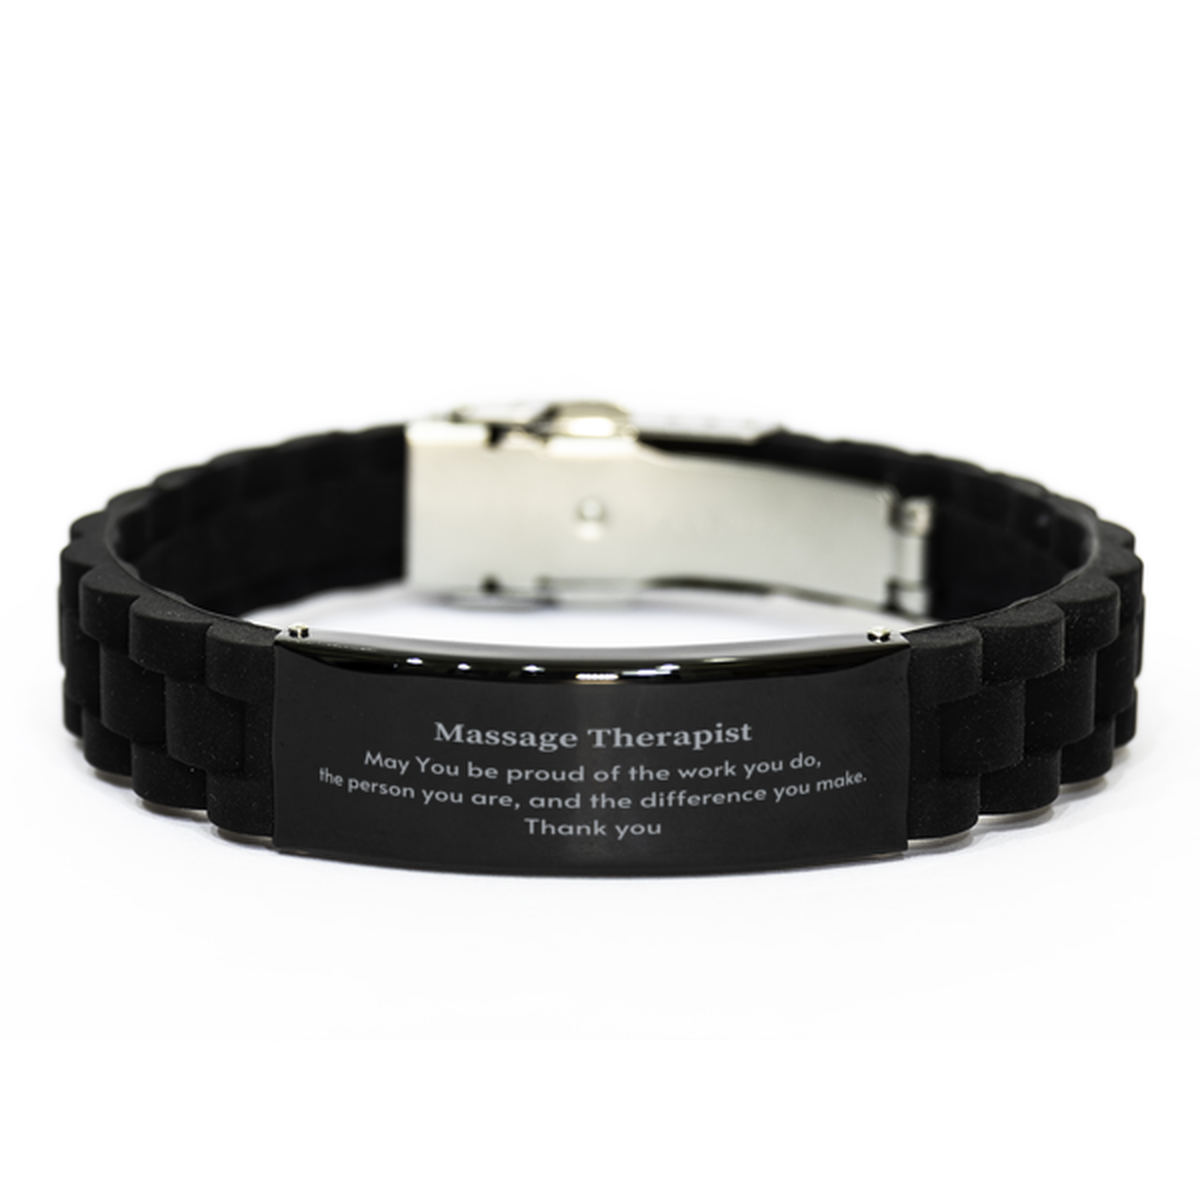 Heartwarming Black Glidelock Clasp Bracelet Retirement Coworkers Gifts for Massage Therapist, Massage Therapist May You be proud of the work you do, the person you are Gifts for Boss Men Women Friends